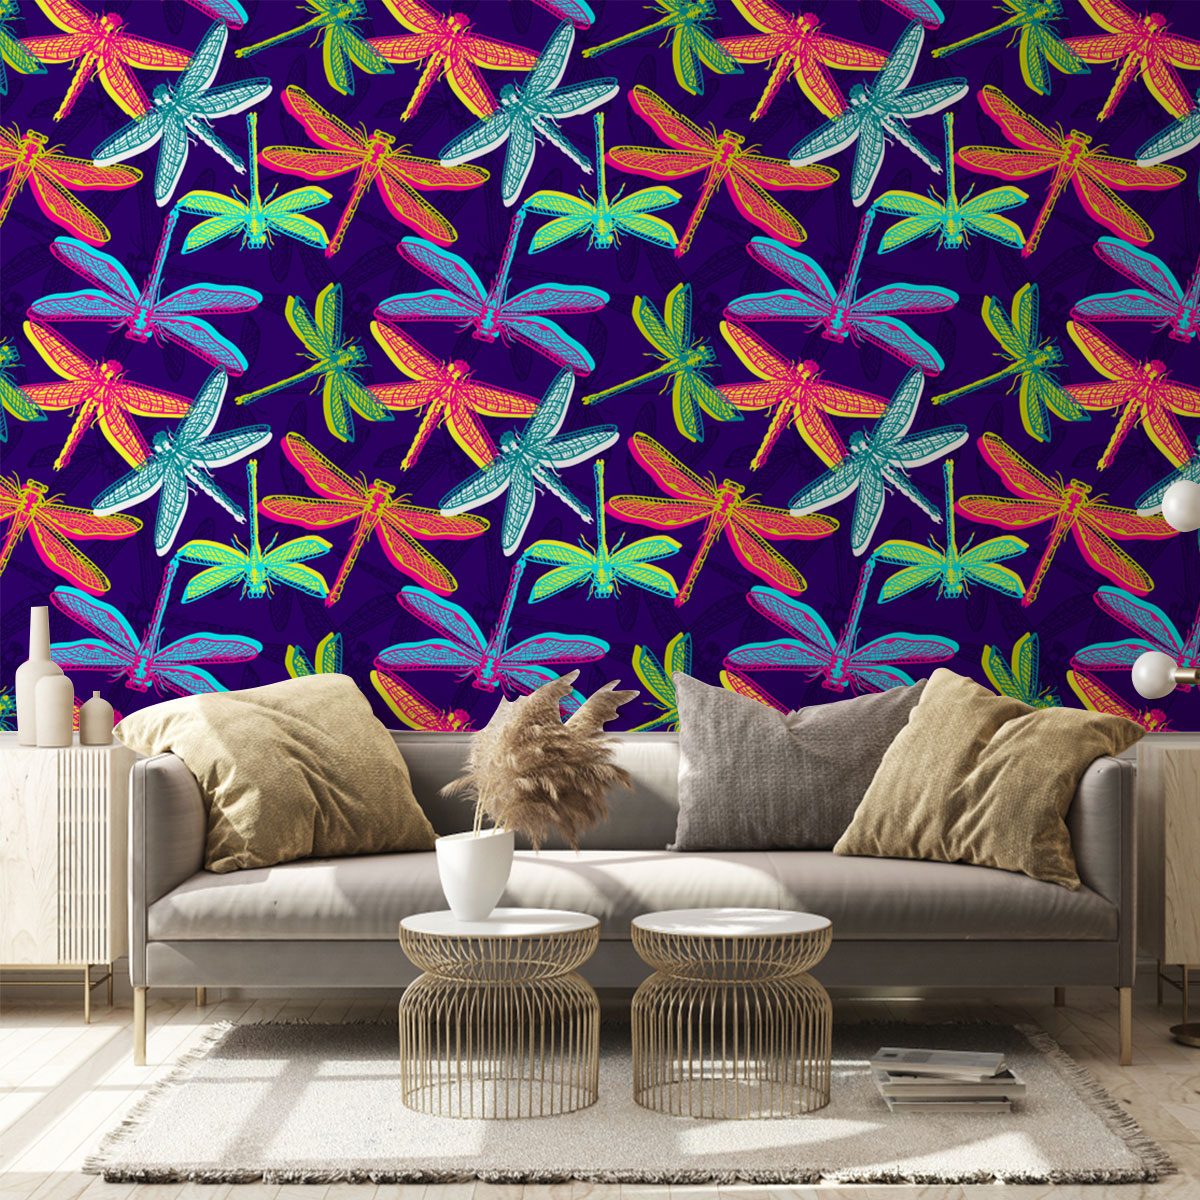 Neon Color Dragonfly Wall Mural